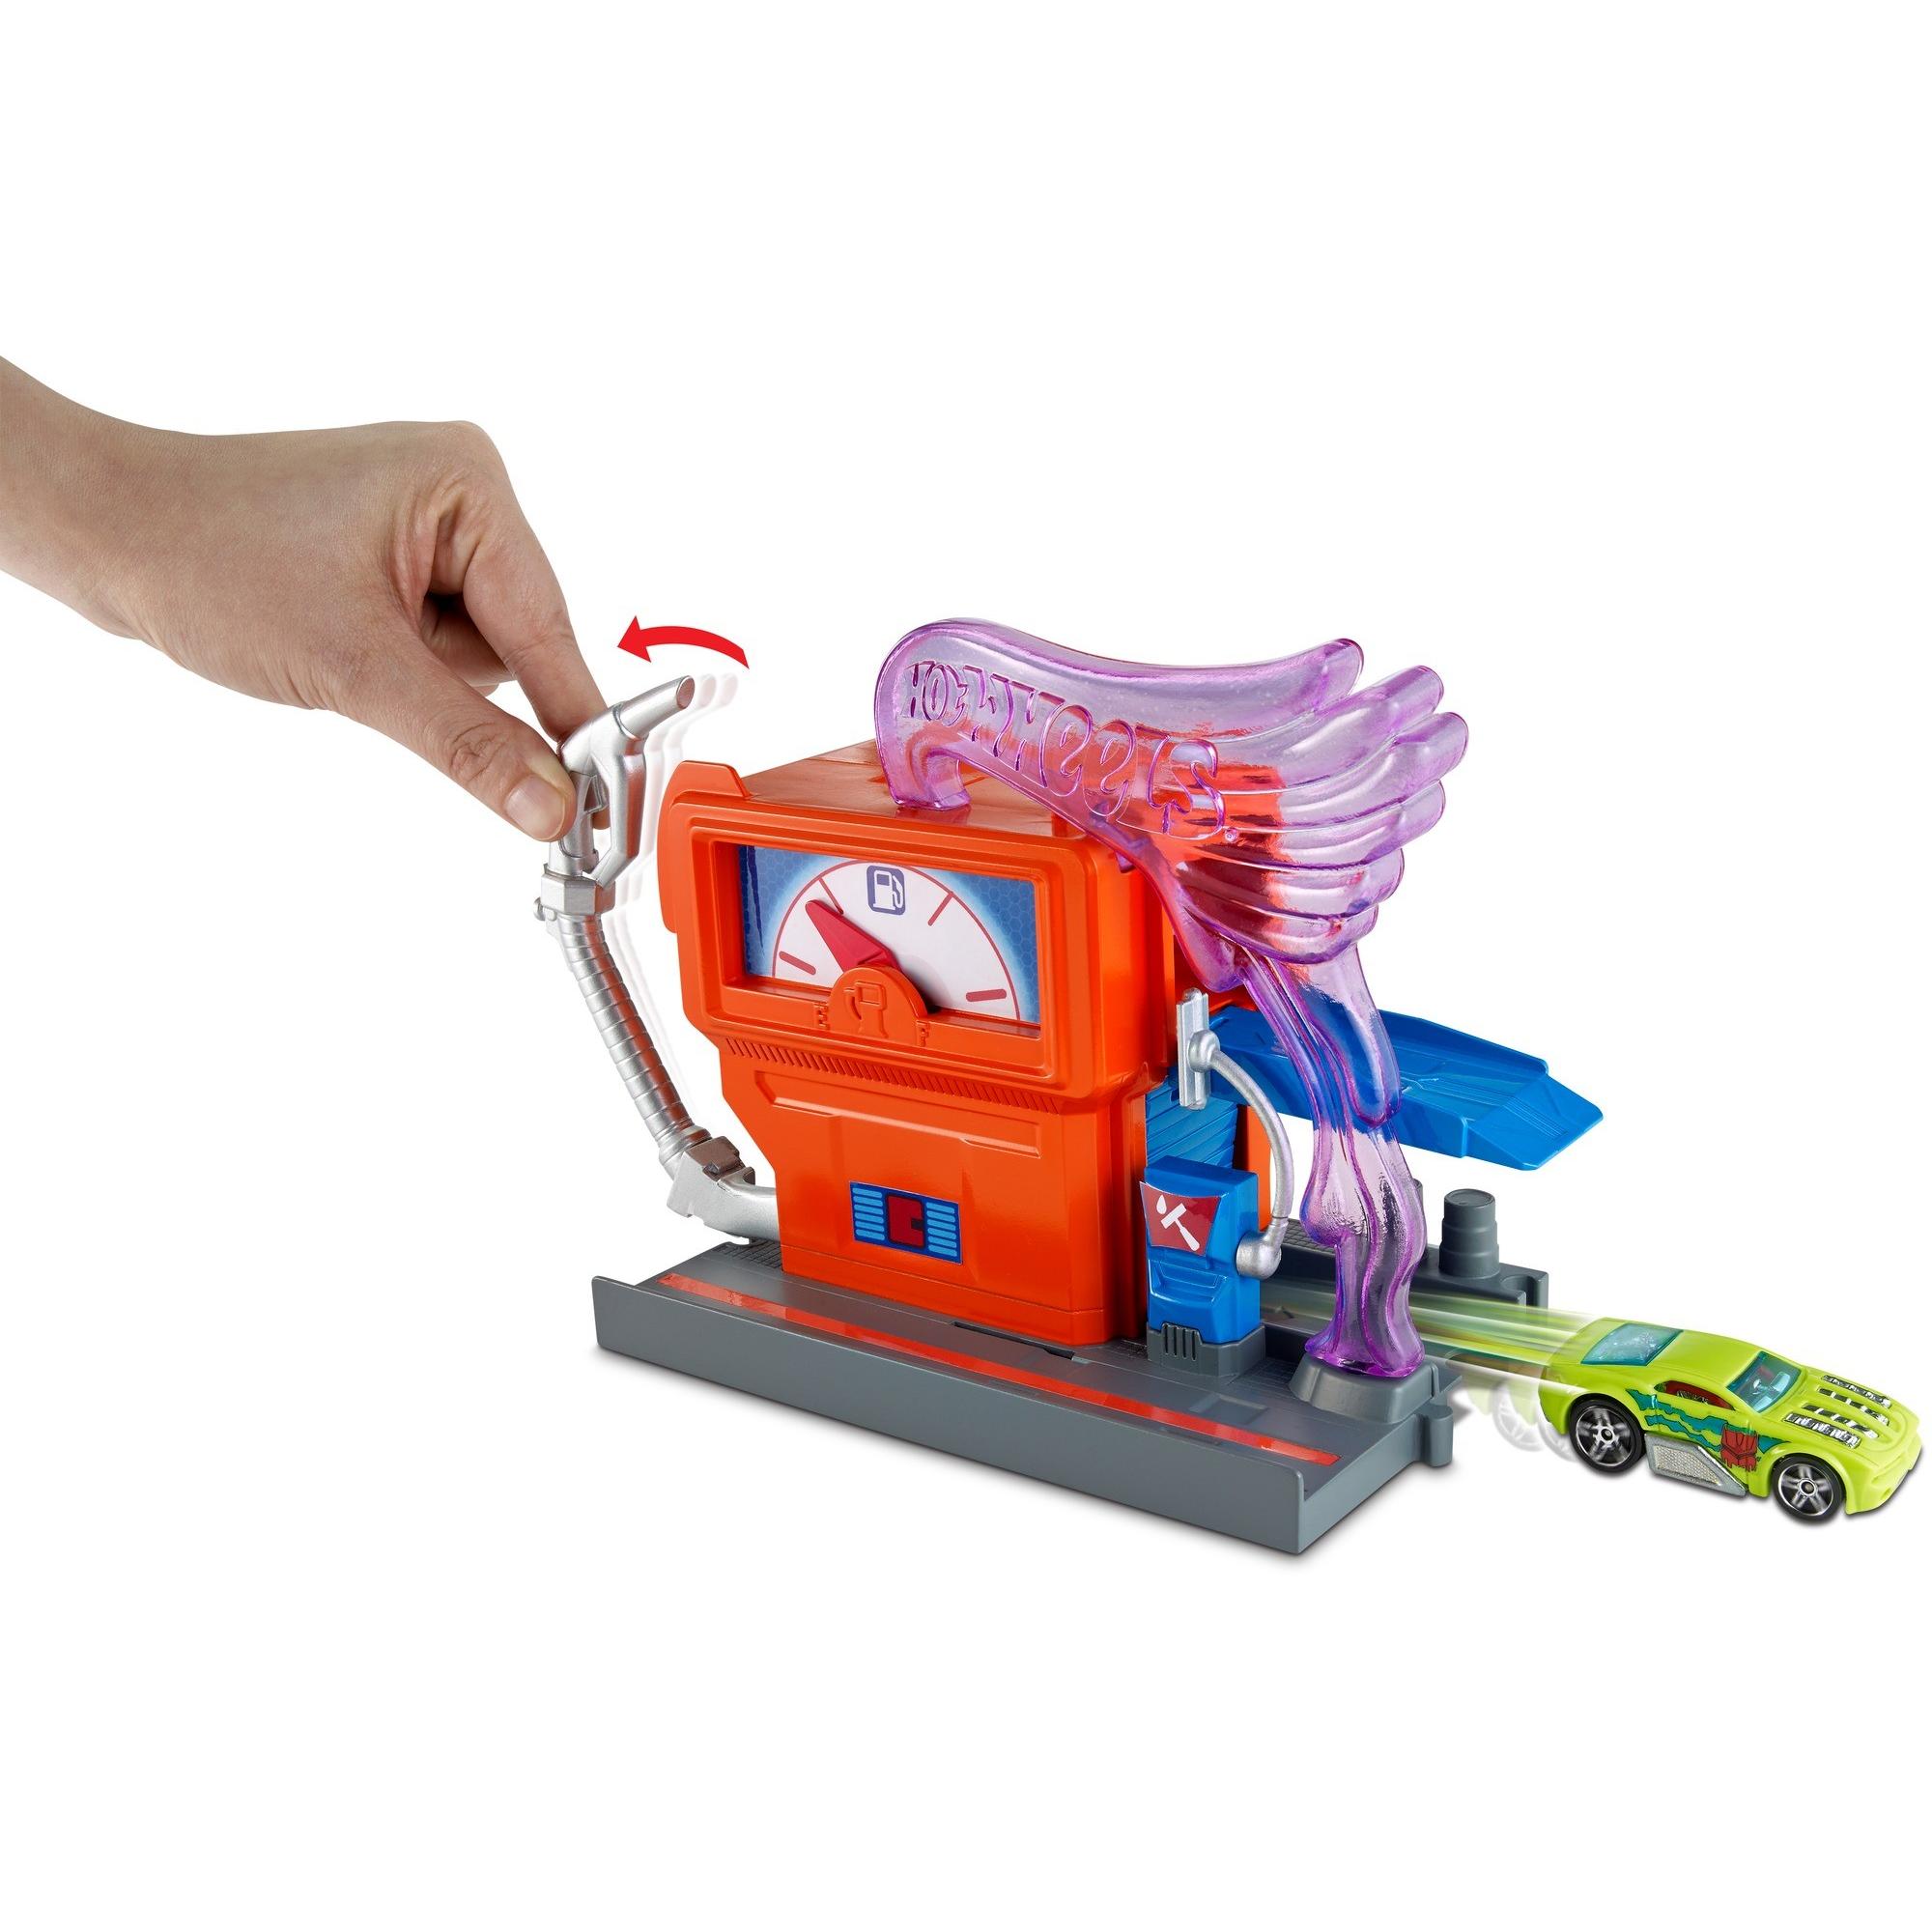 Hot Wheels City Downtown Super Fuel Stop Play Set - image 1 of 5